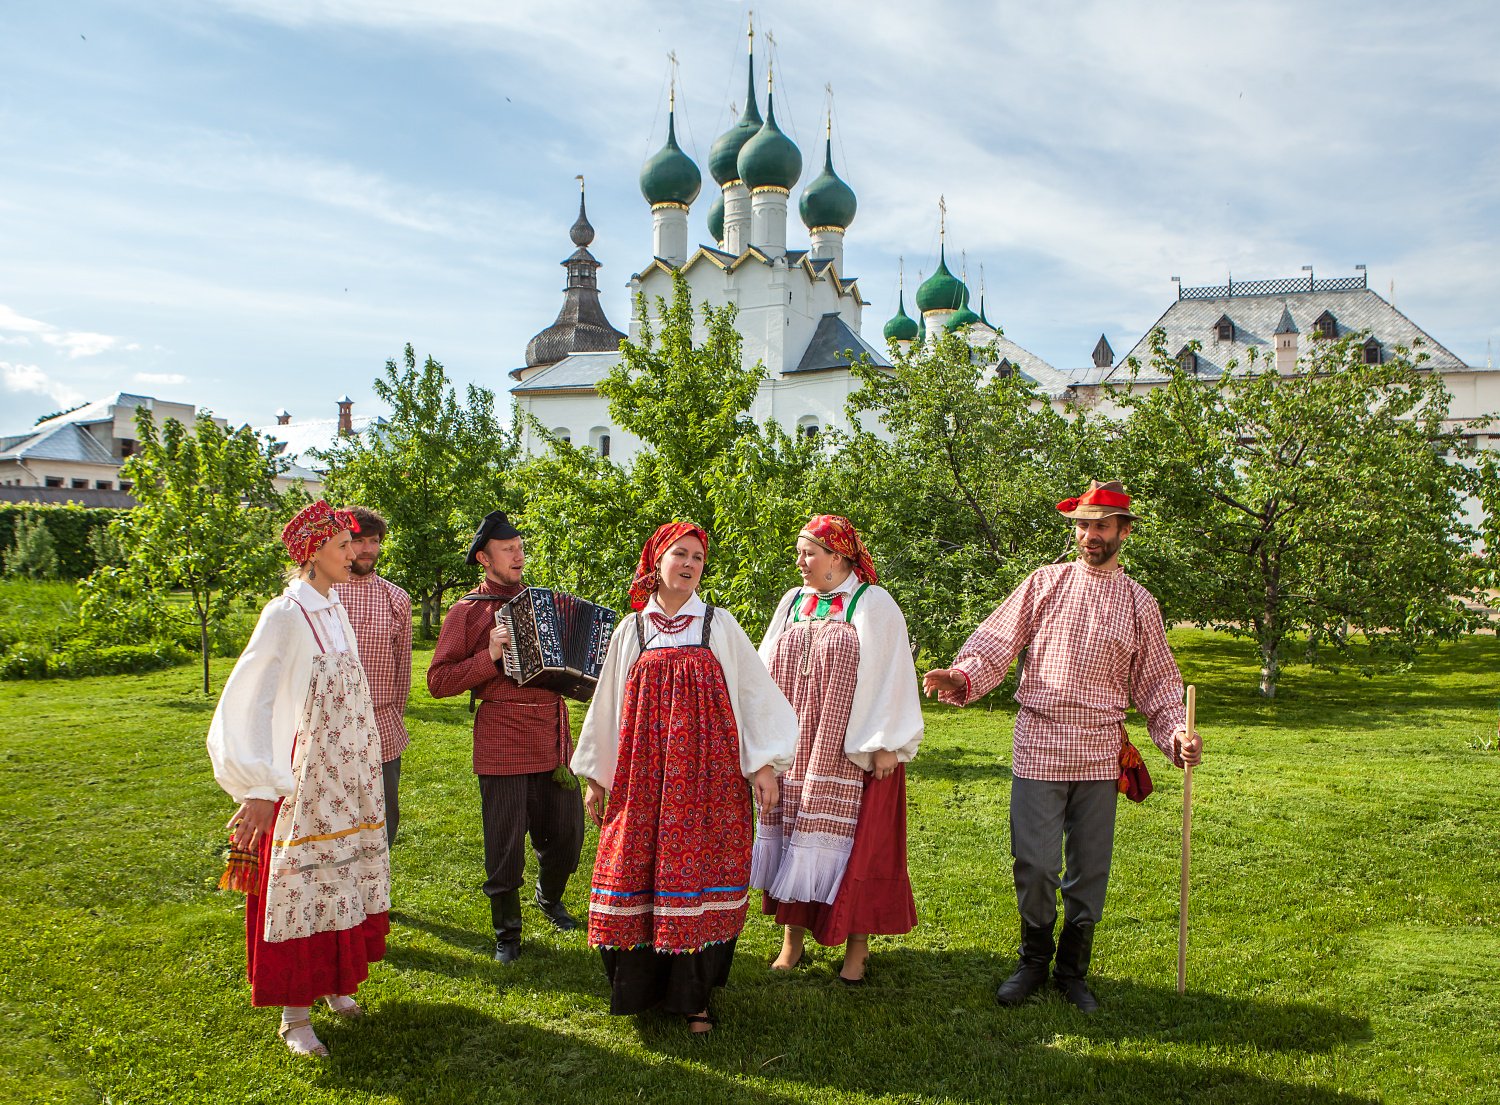 V festival of sport and traditional fun of Yaroslavl region June 2017 (To be confirmed)